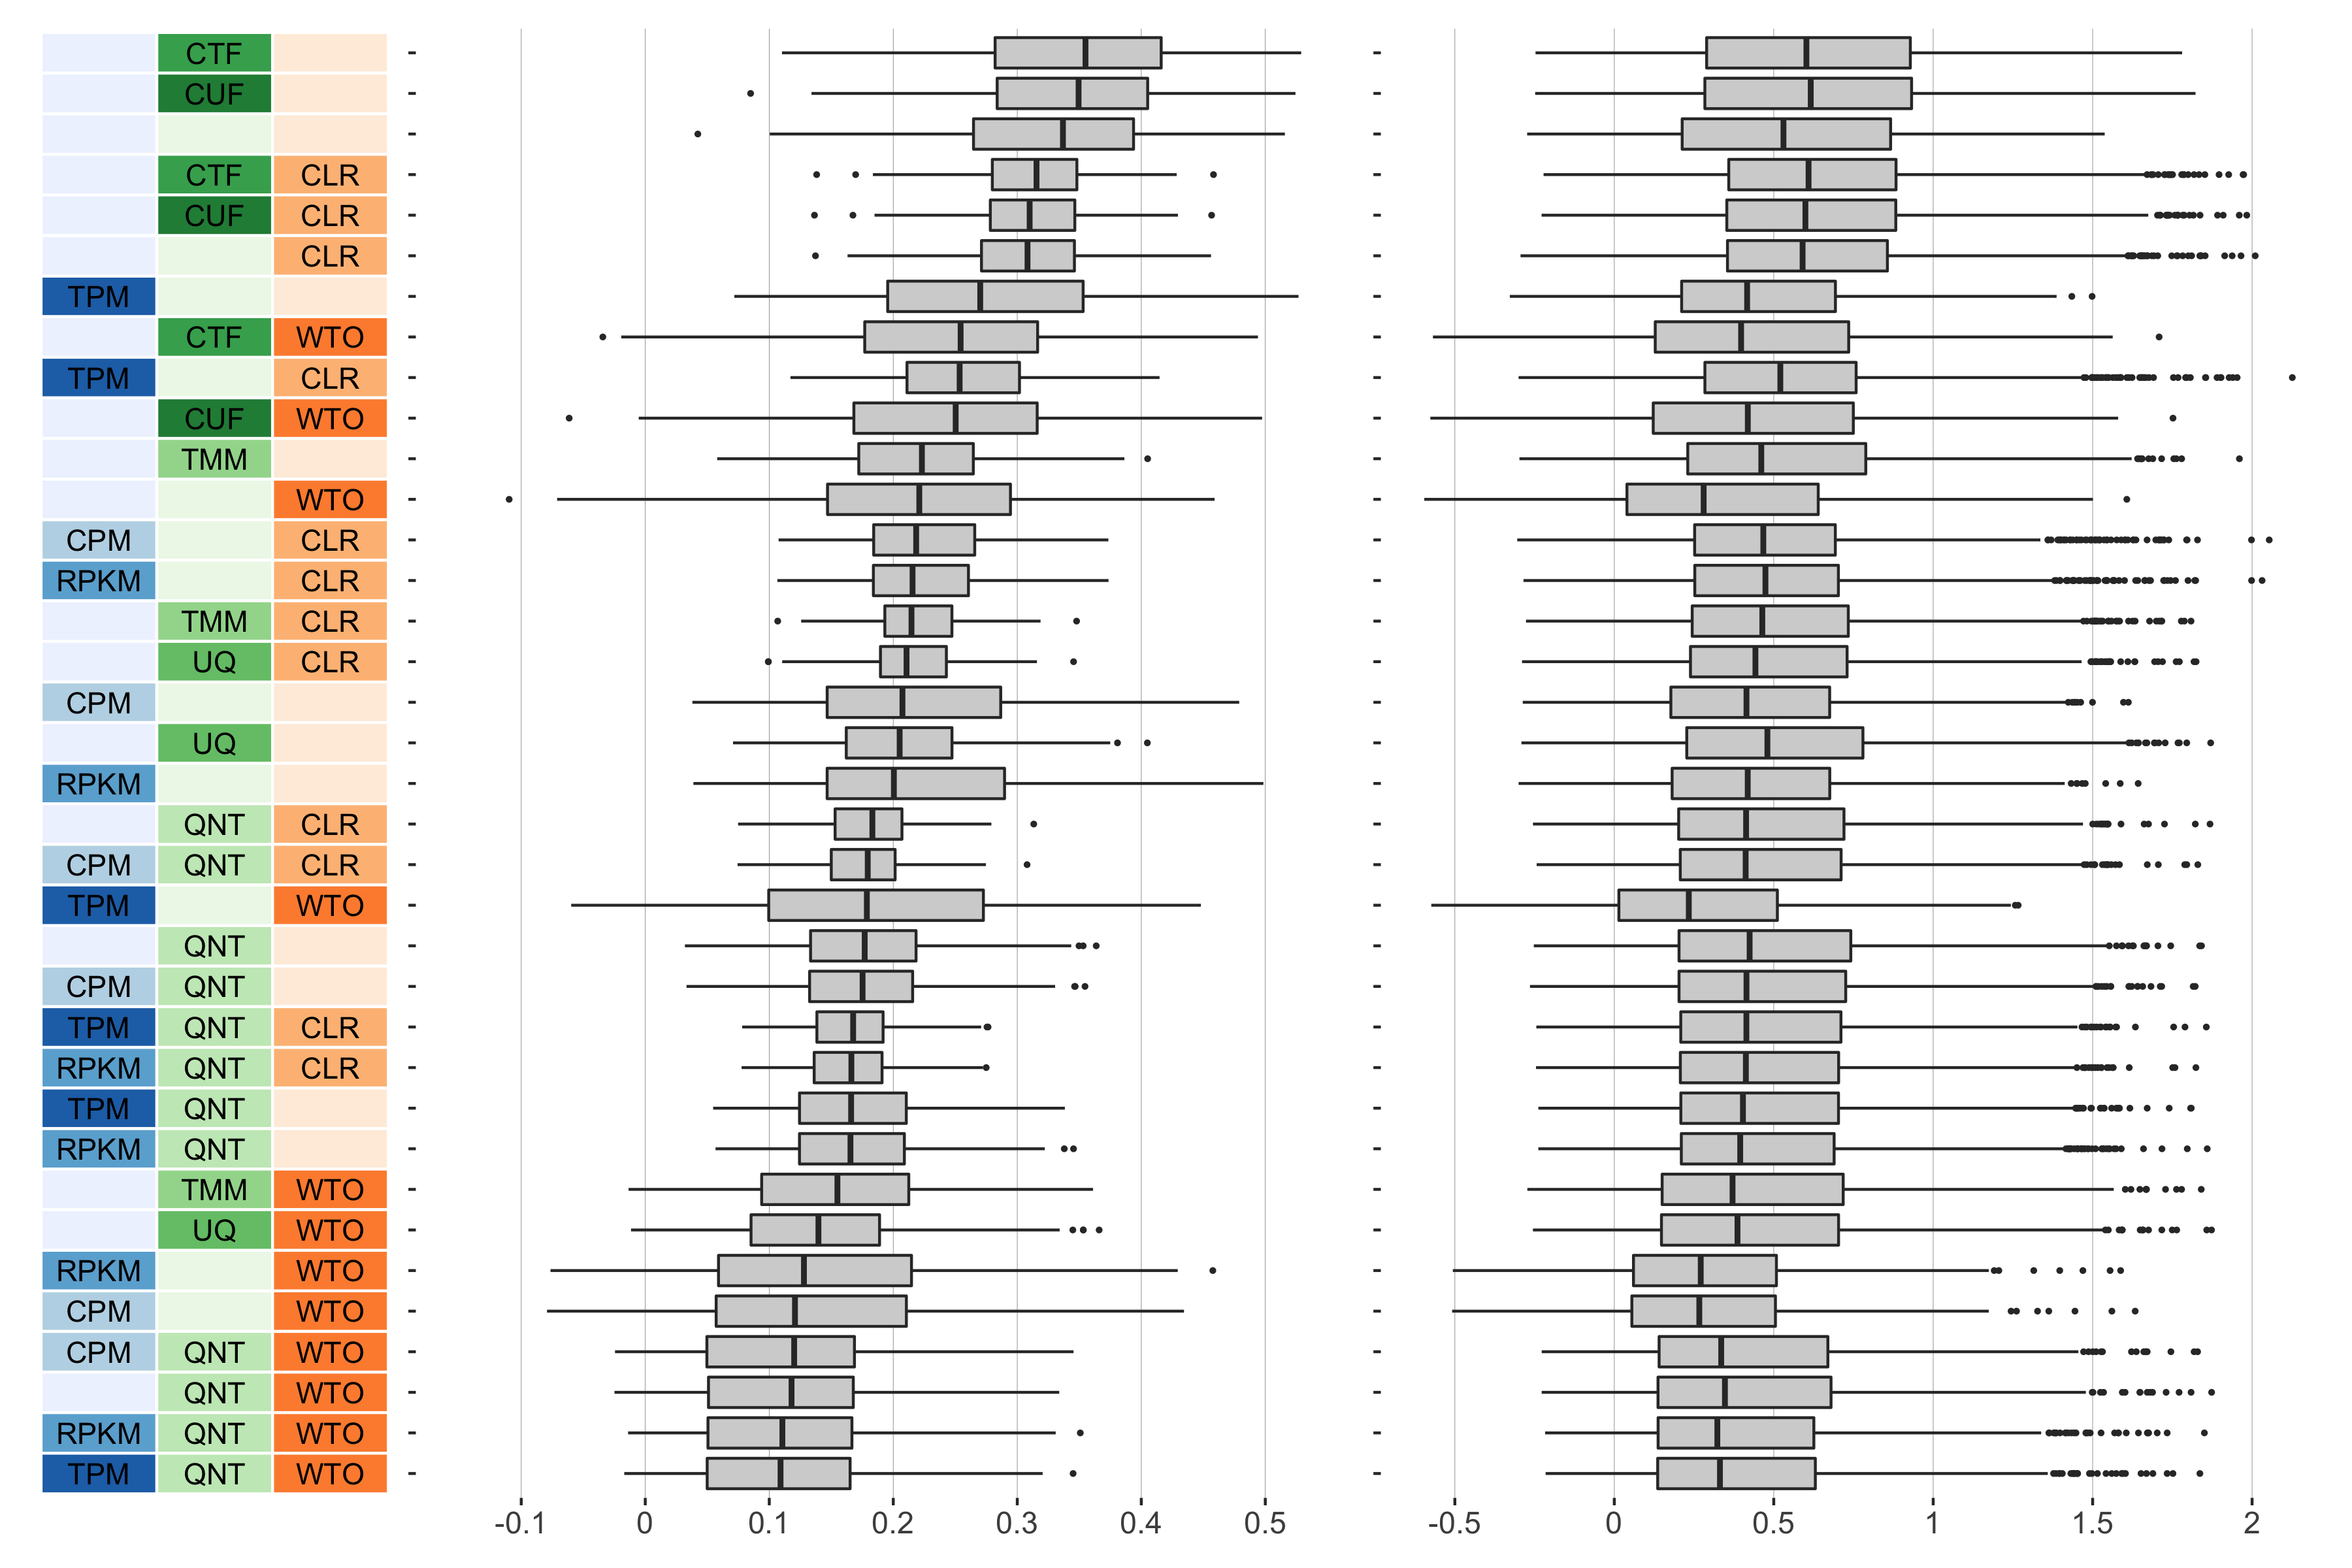 **Overall performance of workflows.** The plots show the aggregate accuracy of all resampled GTEx coexpression networks of a given sample size resulting from each individual workflow evaluated using the (**left**) tissue-naive and (**right**) tissue-aware gold standards. The workflows (rows) are described in terms of the specific method used in the within-sample normalization (blues), between-sample normalization (greens), and network transformation (oranges) stages. The performance of each workflow is presented as boxplots that summarizes the log2(auPRC/prior) of each workflow where auPRC is the area under the precision recall curve. The workflows are ordered by their median log2(auPRC/prior) for the tissue-naive data.